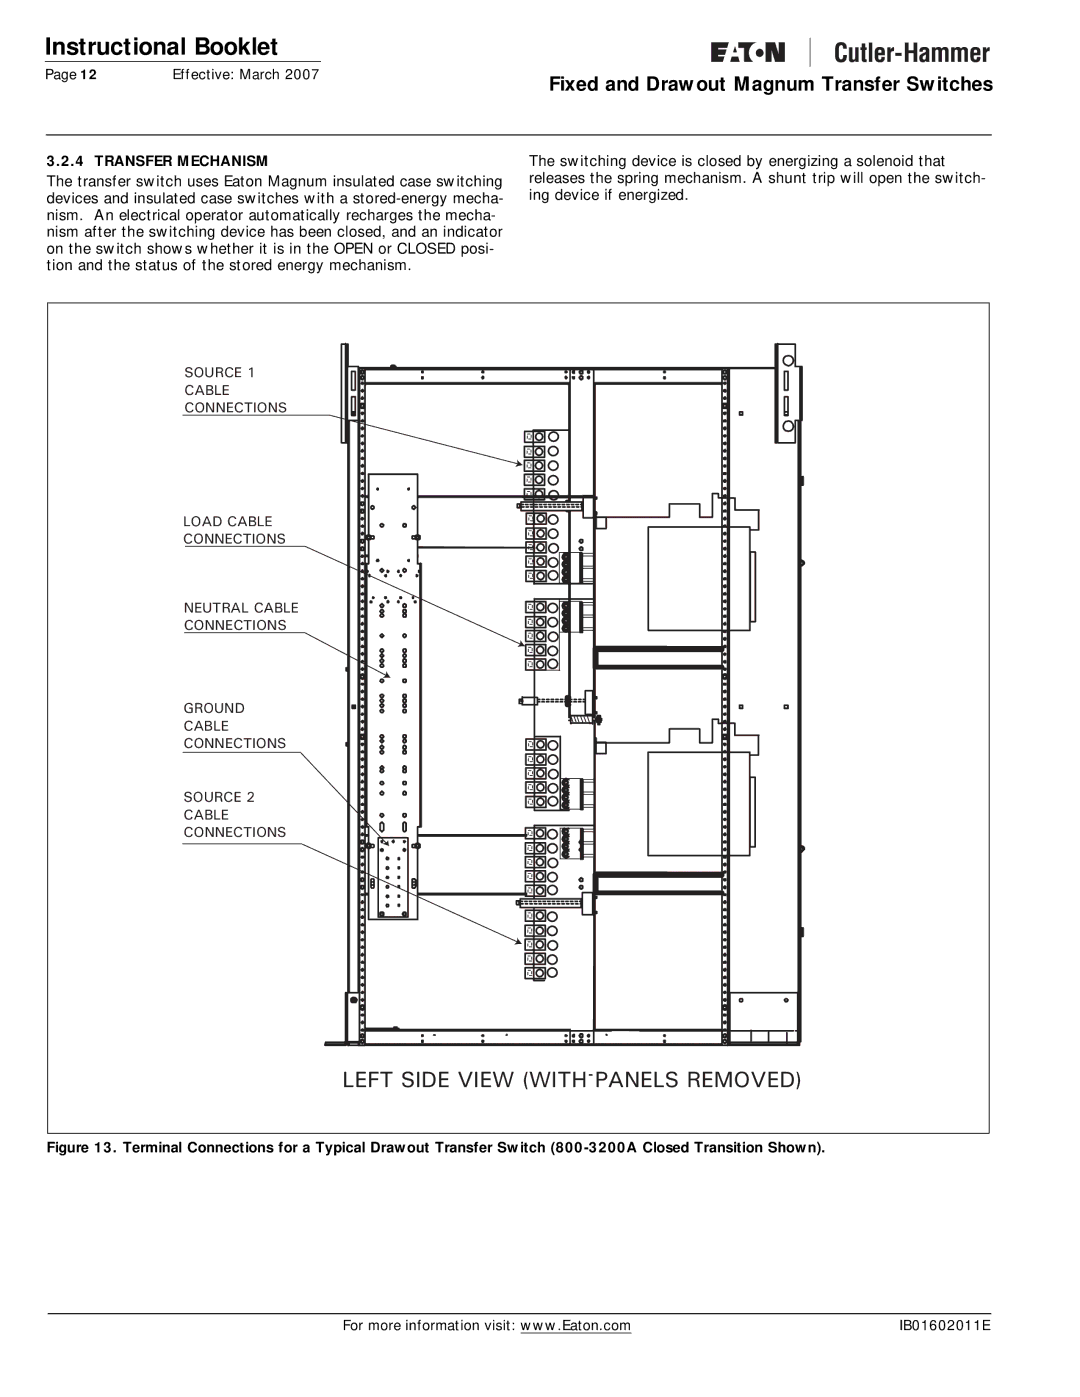 Eaton Electrical Magnum Transfer Switch manual Left Side View with Panels Removed 